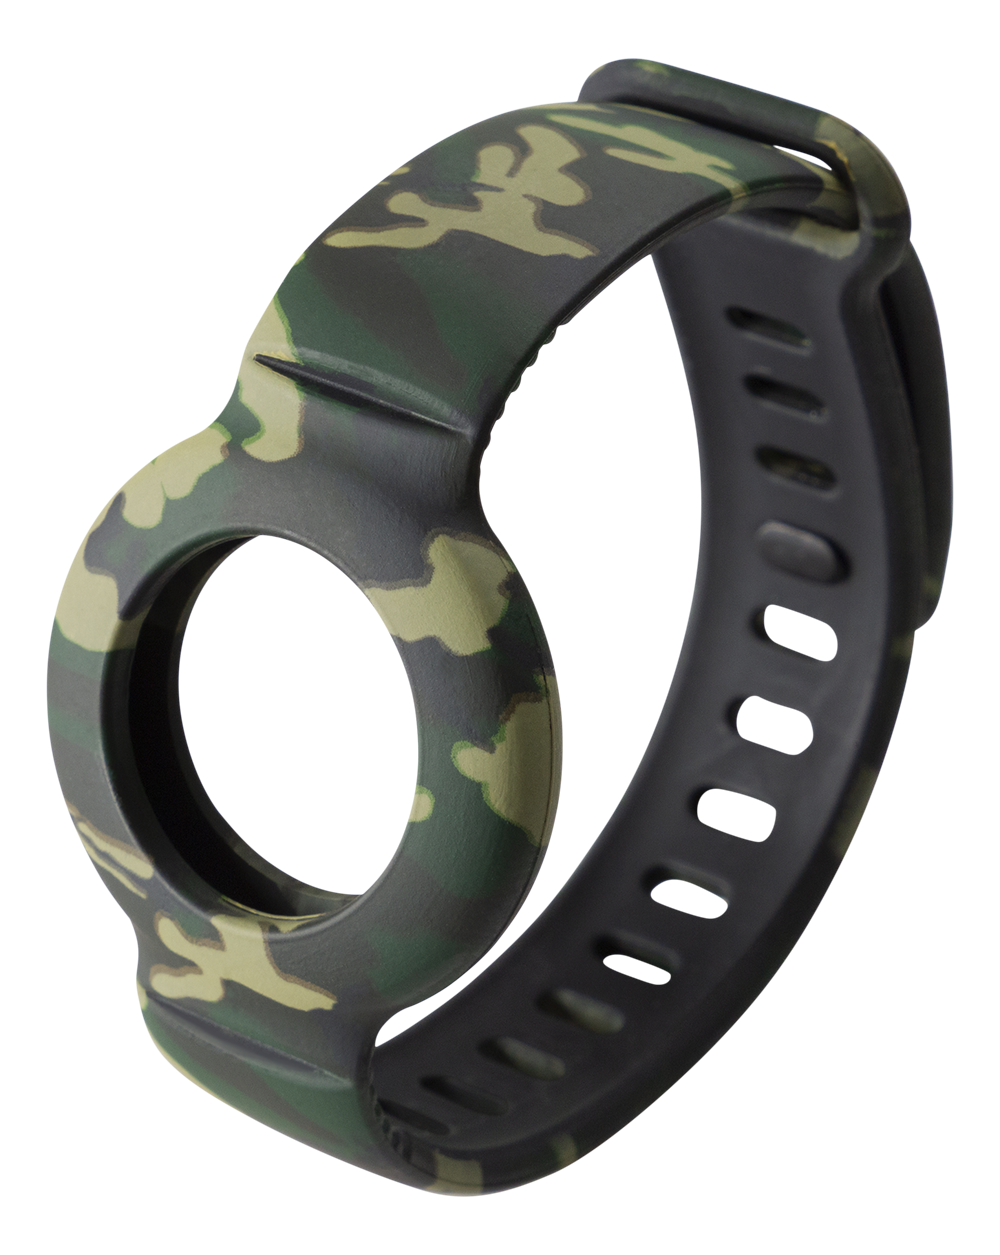 Silicone bracelet for Apple AirTag DELTACO adjustable size, camouflage / MCASE-TAG18